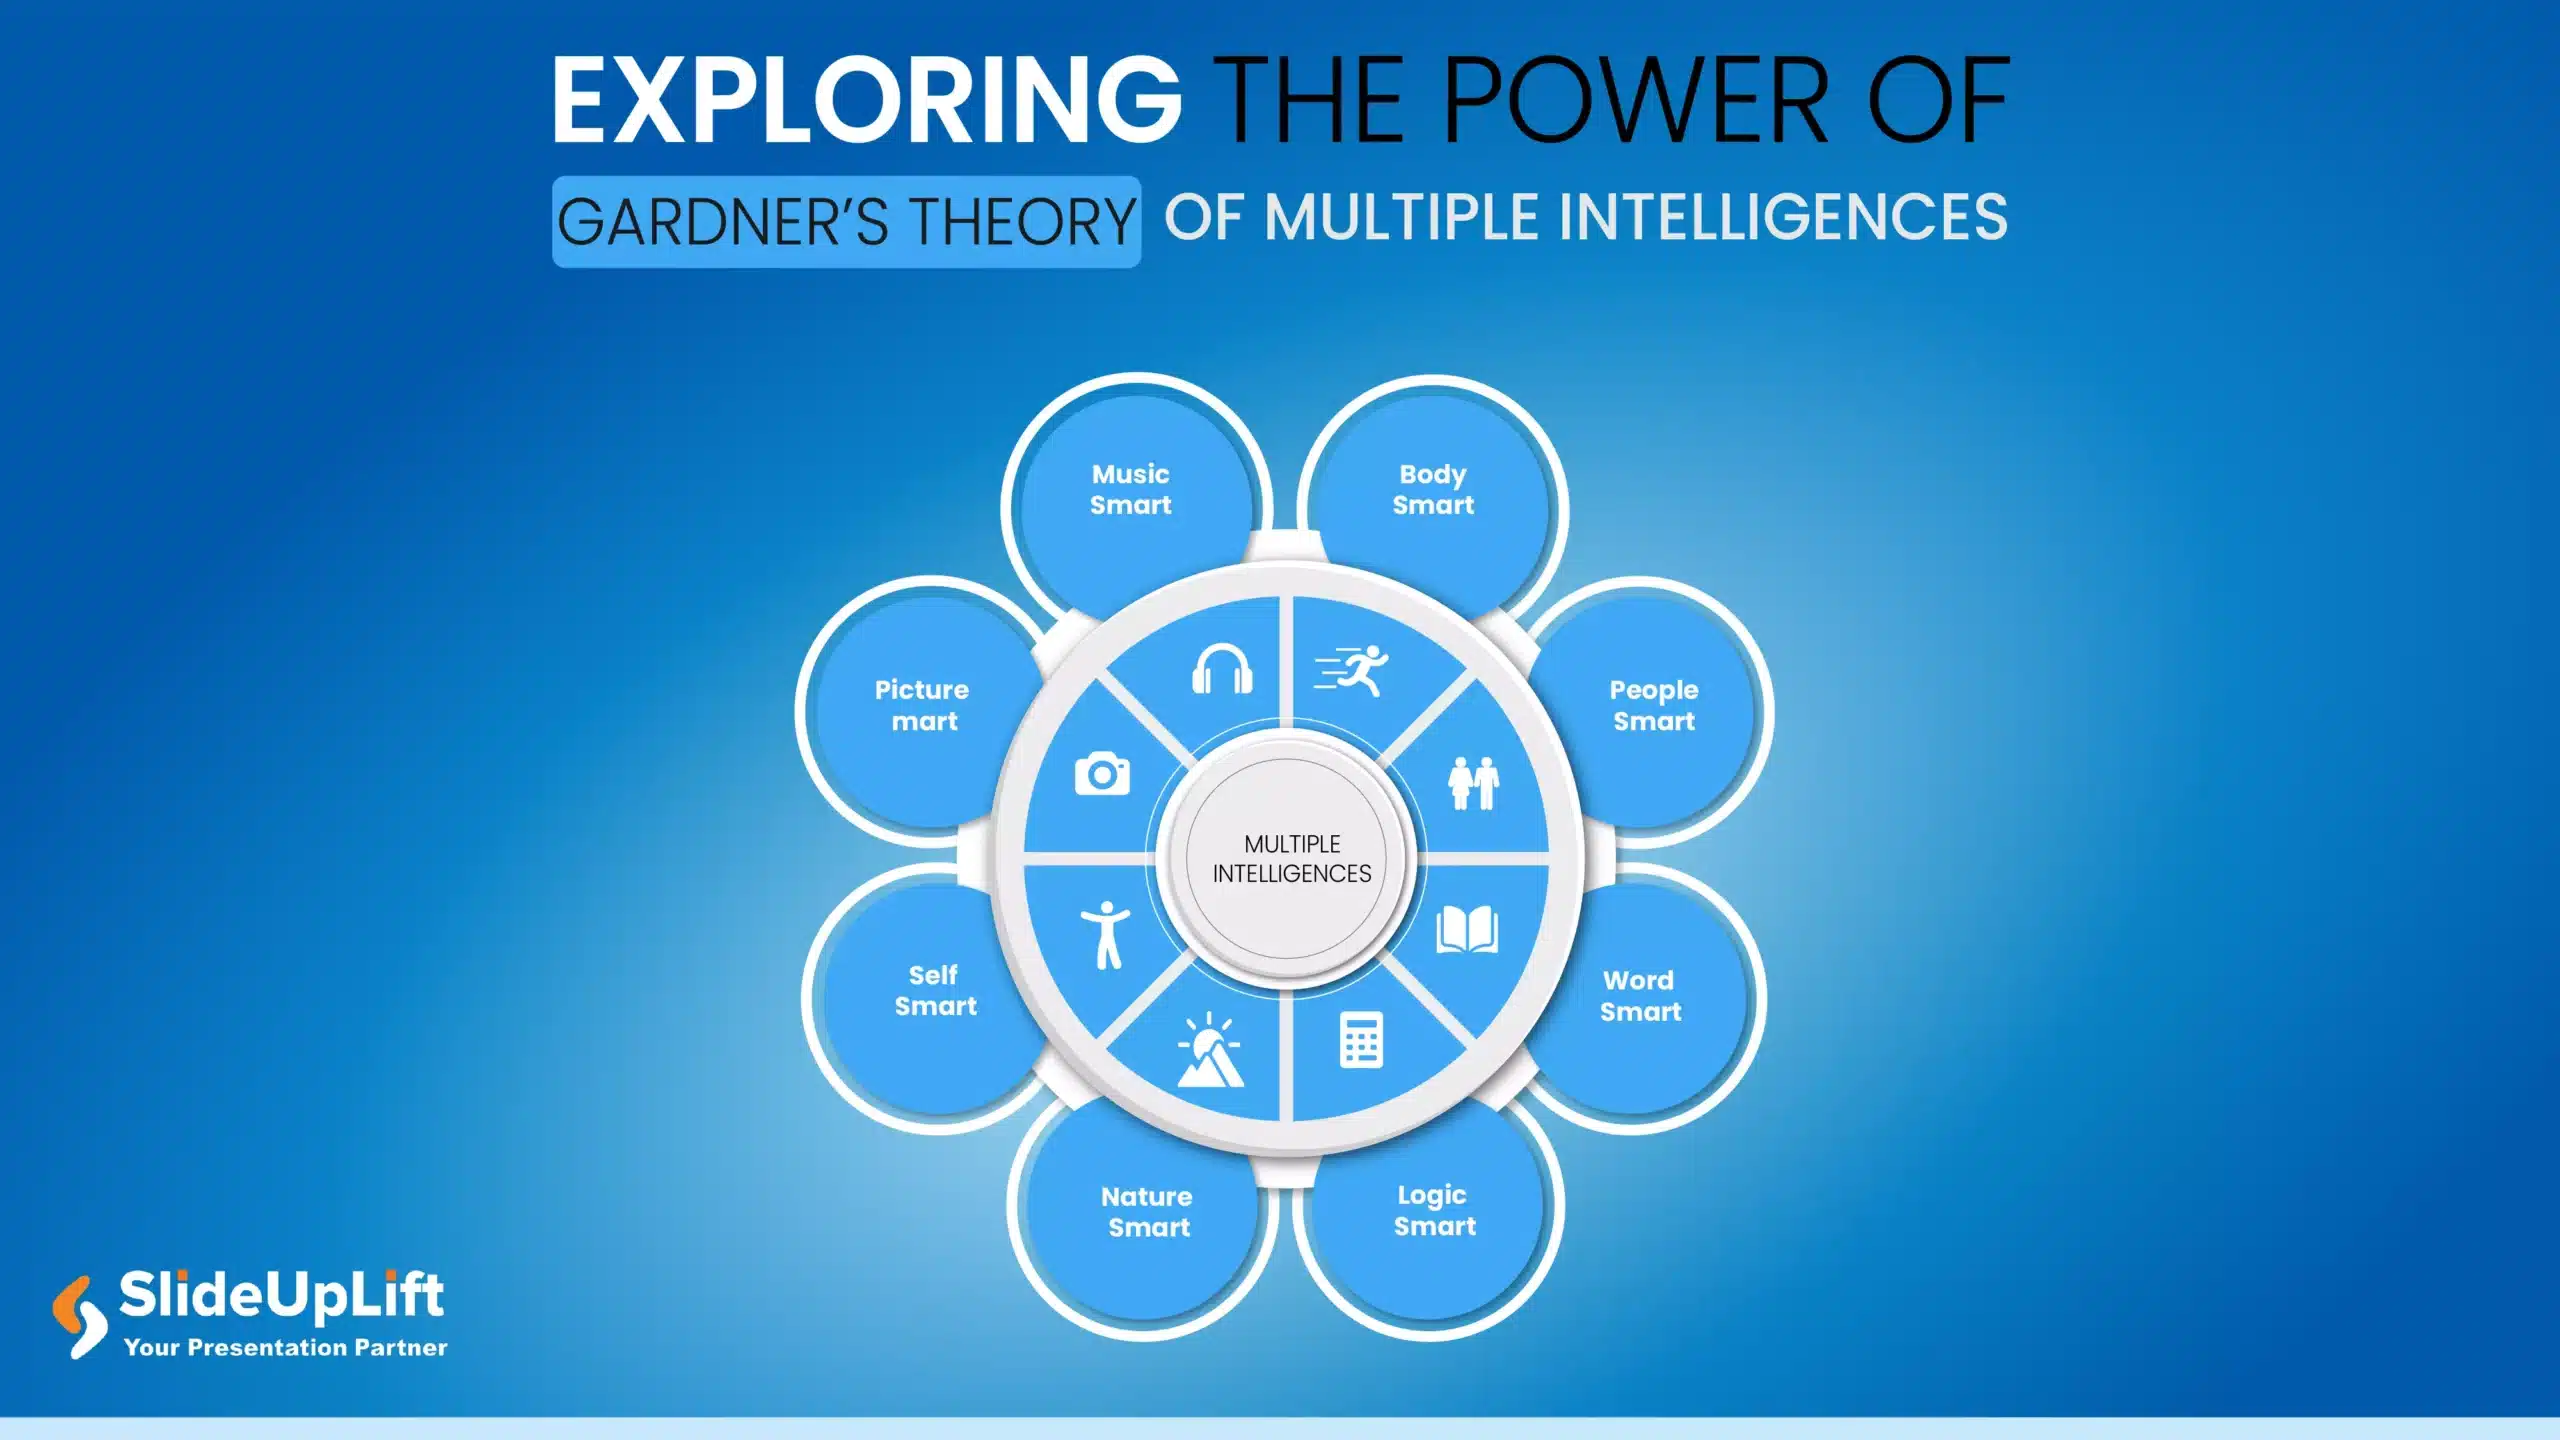 Exploring The Power of Gardner’s Theory of Multiple Intelligences